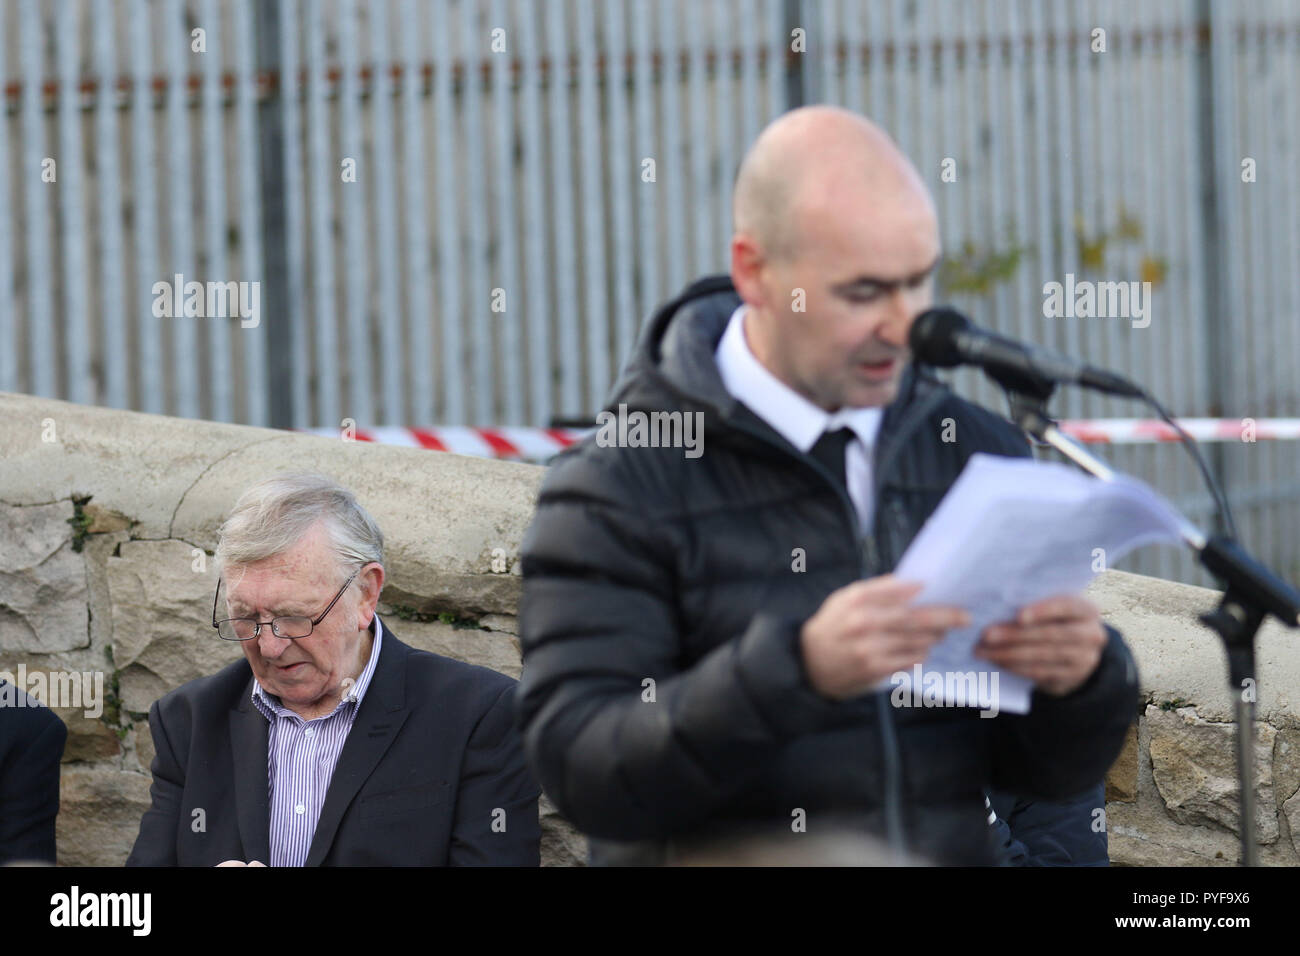 Billy Begley the father of Shankill bomber Thomas Begley listens to former PIRA member Sean Kelly speak at Milltown Cemetery in West Belfast, as Hundreds of people from across the communities of Northern Ireland have come together for a church service to mark the 25th anniversary of the Shankill bomb. Stock Photo